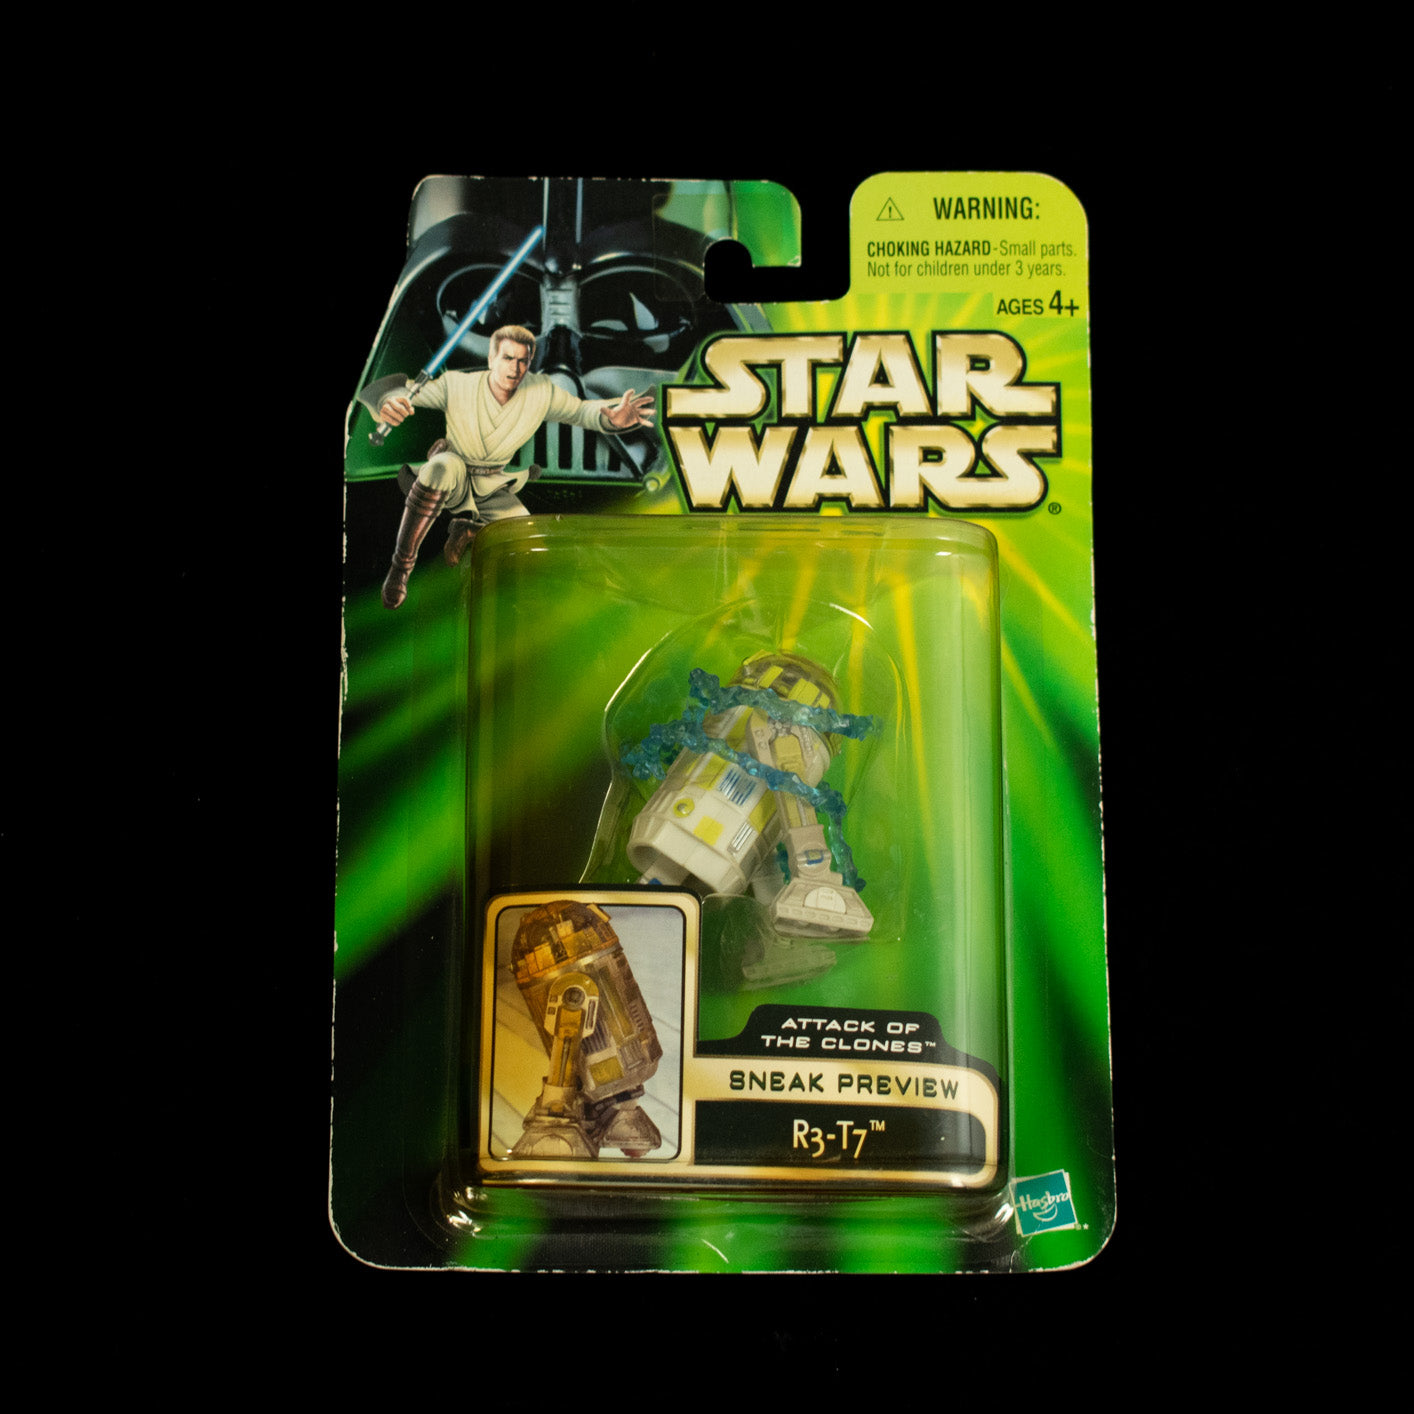 Star Wars Power of the Force R3-T7 Sneak Preview 345